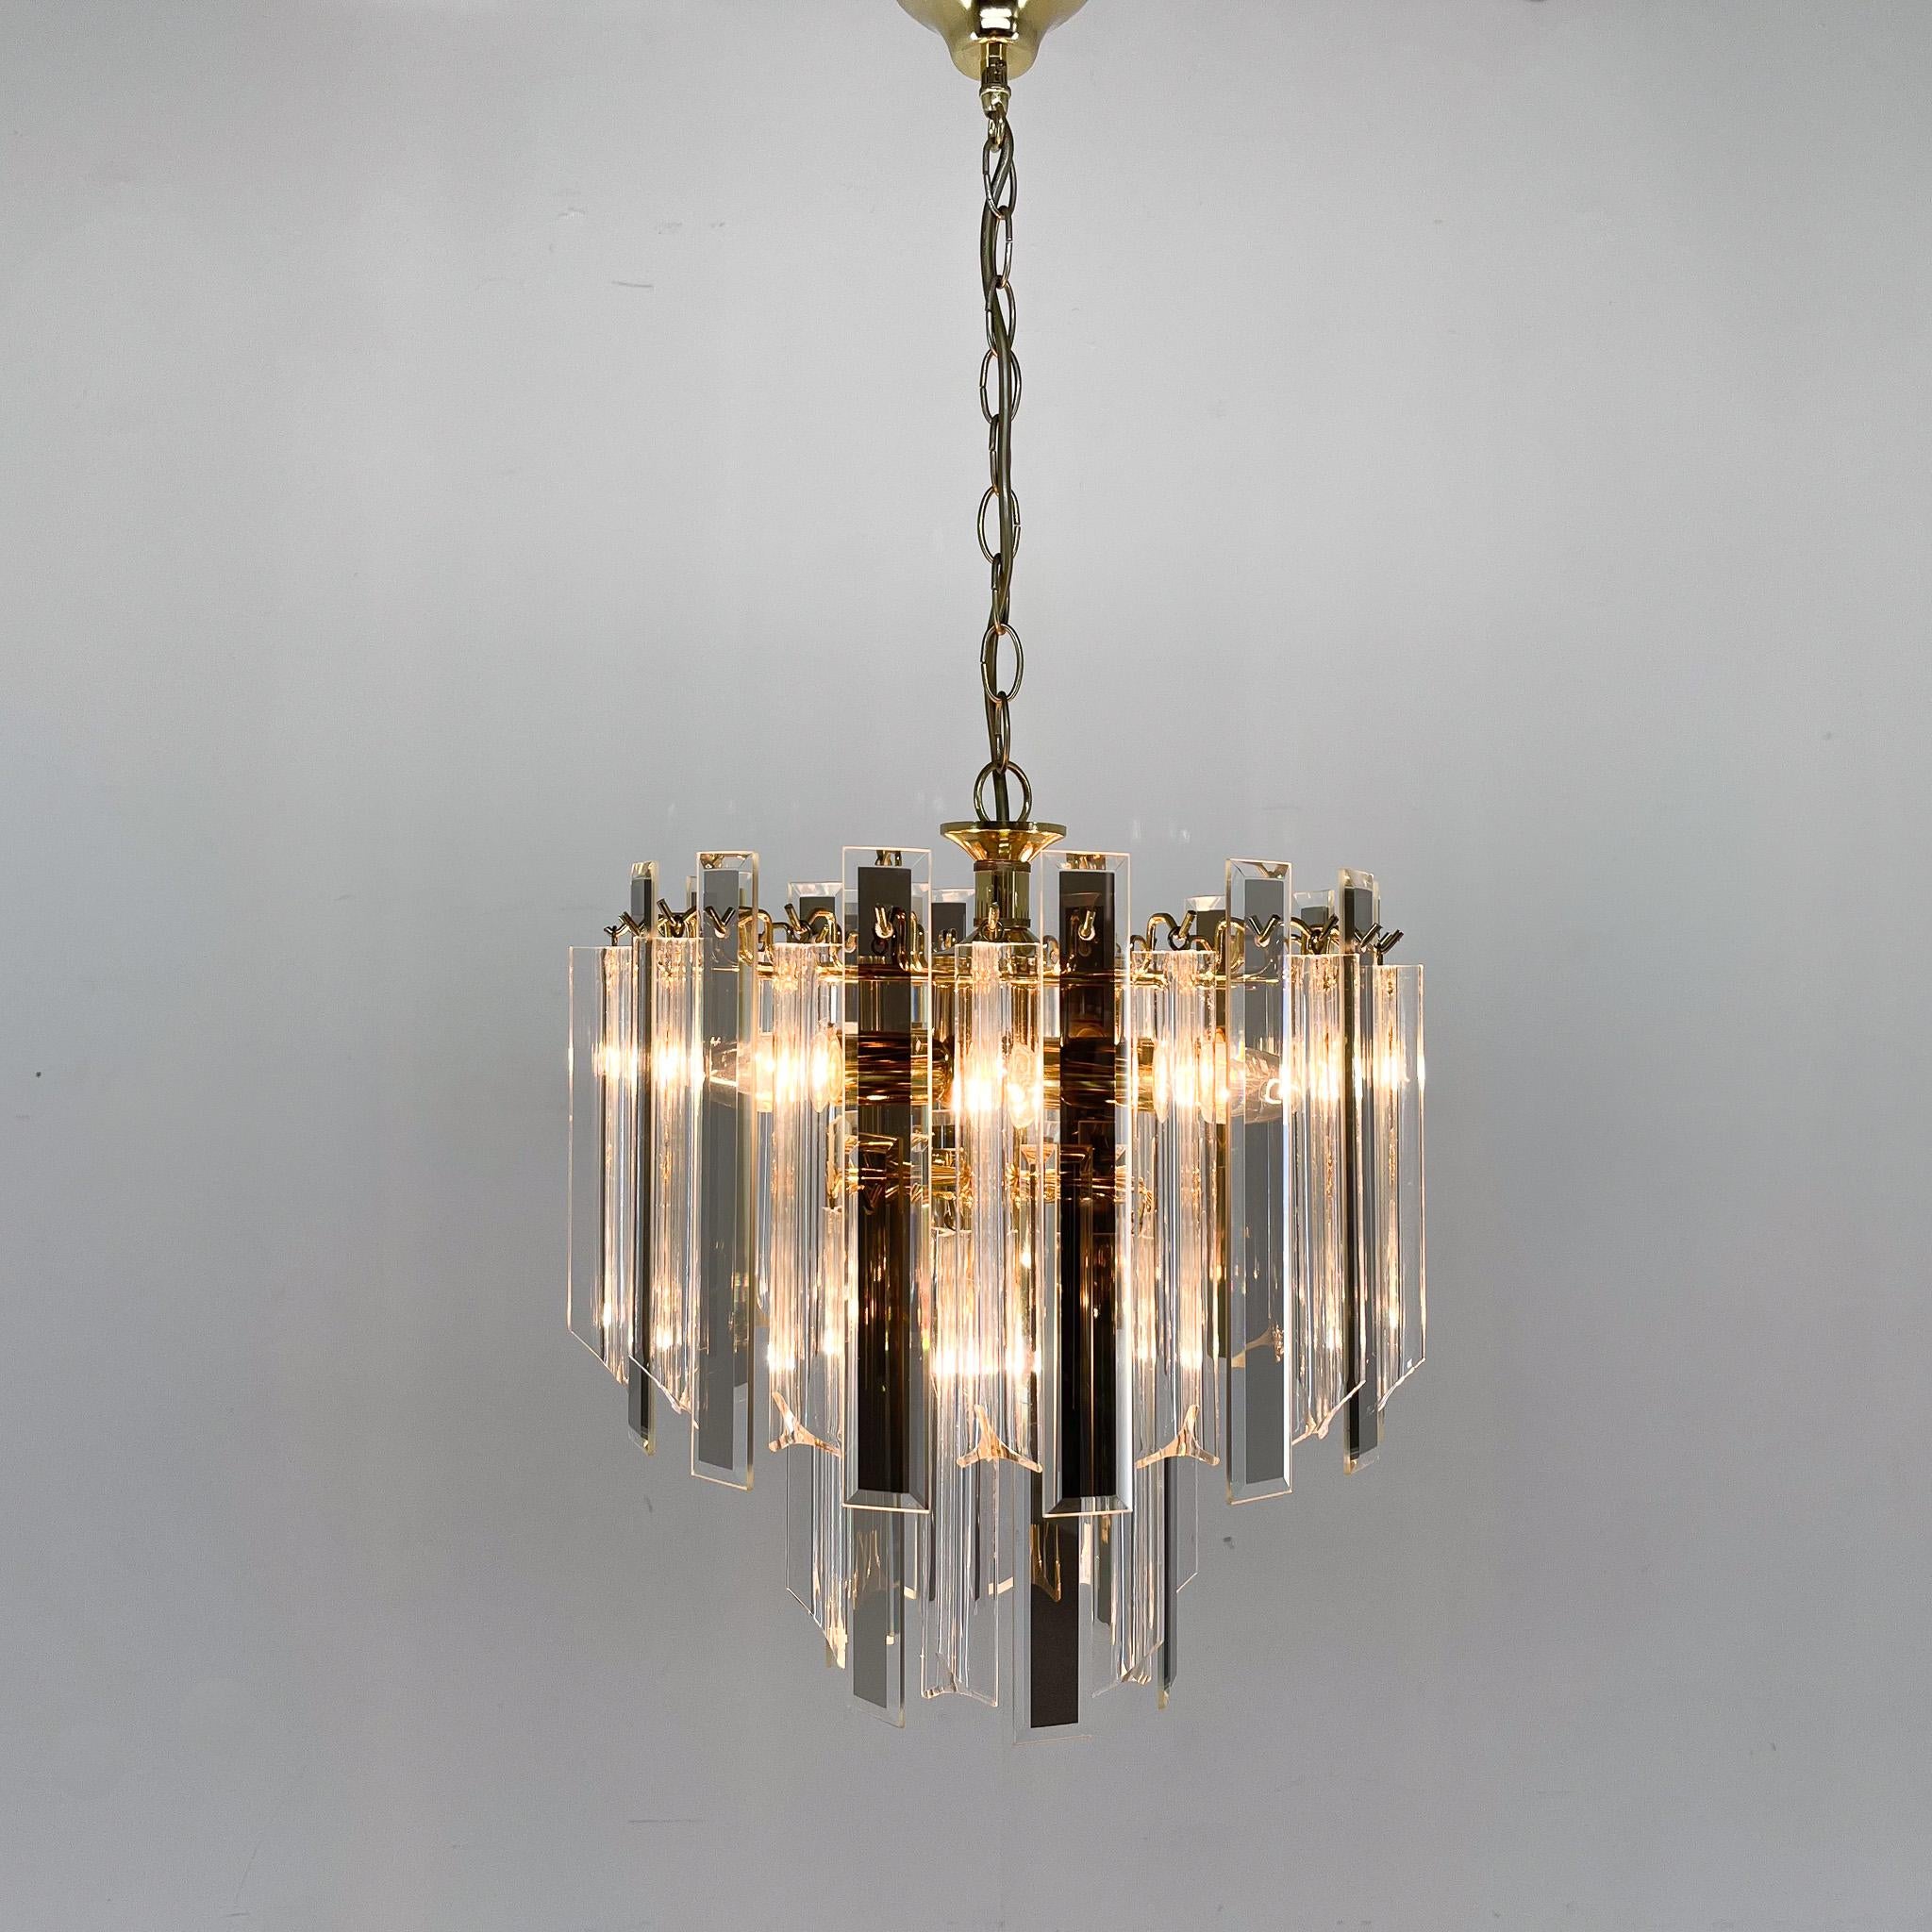 Midcentury Brass, Glass and Lucite Chandelier, Austria 1970s For Sale 5